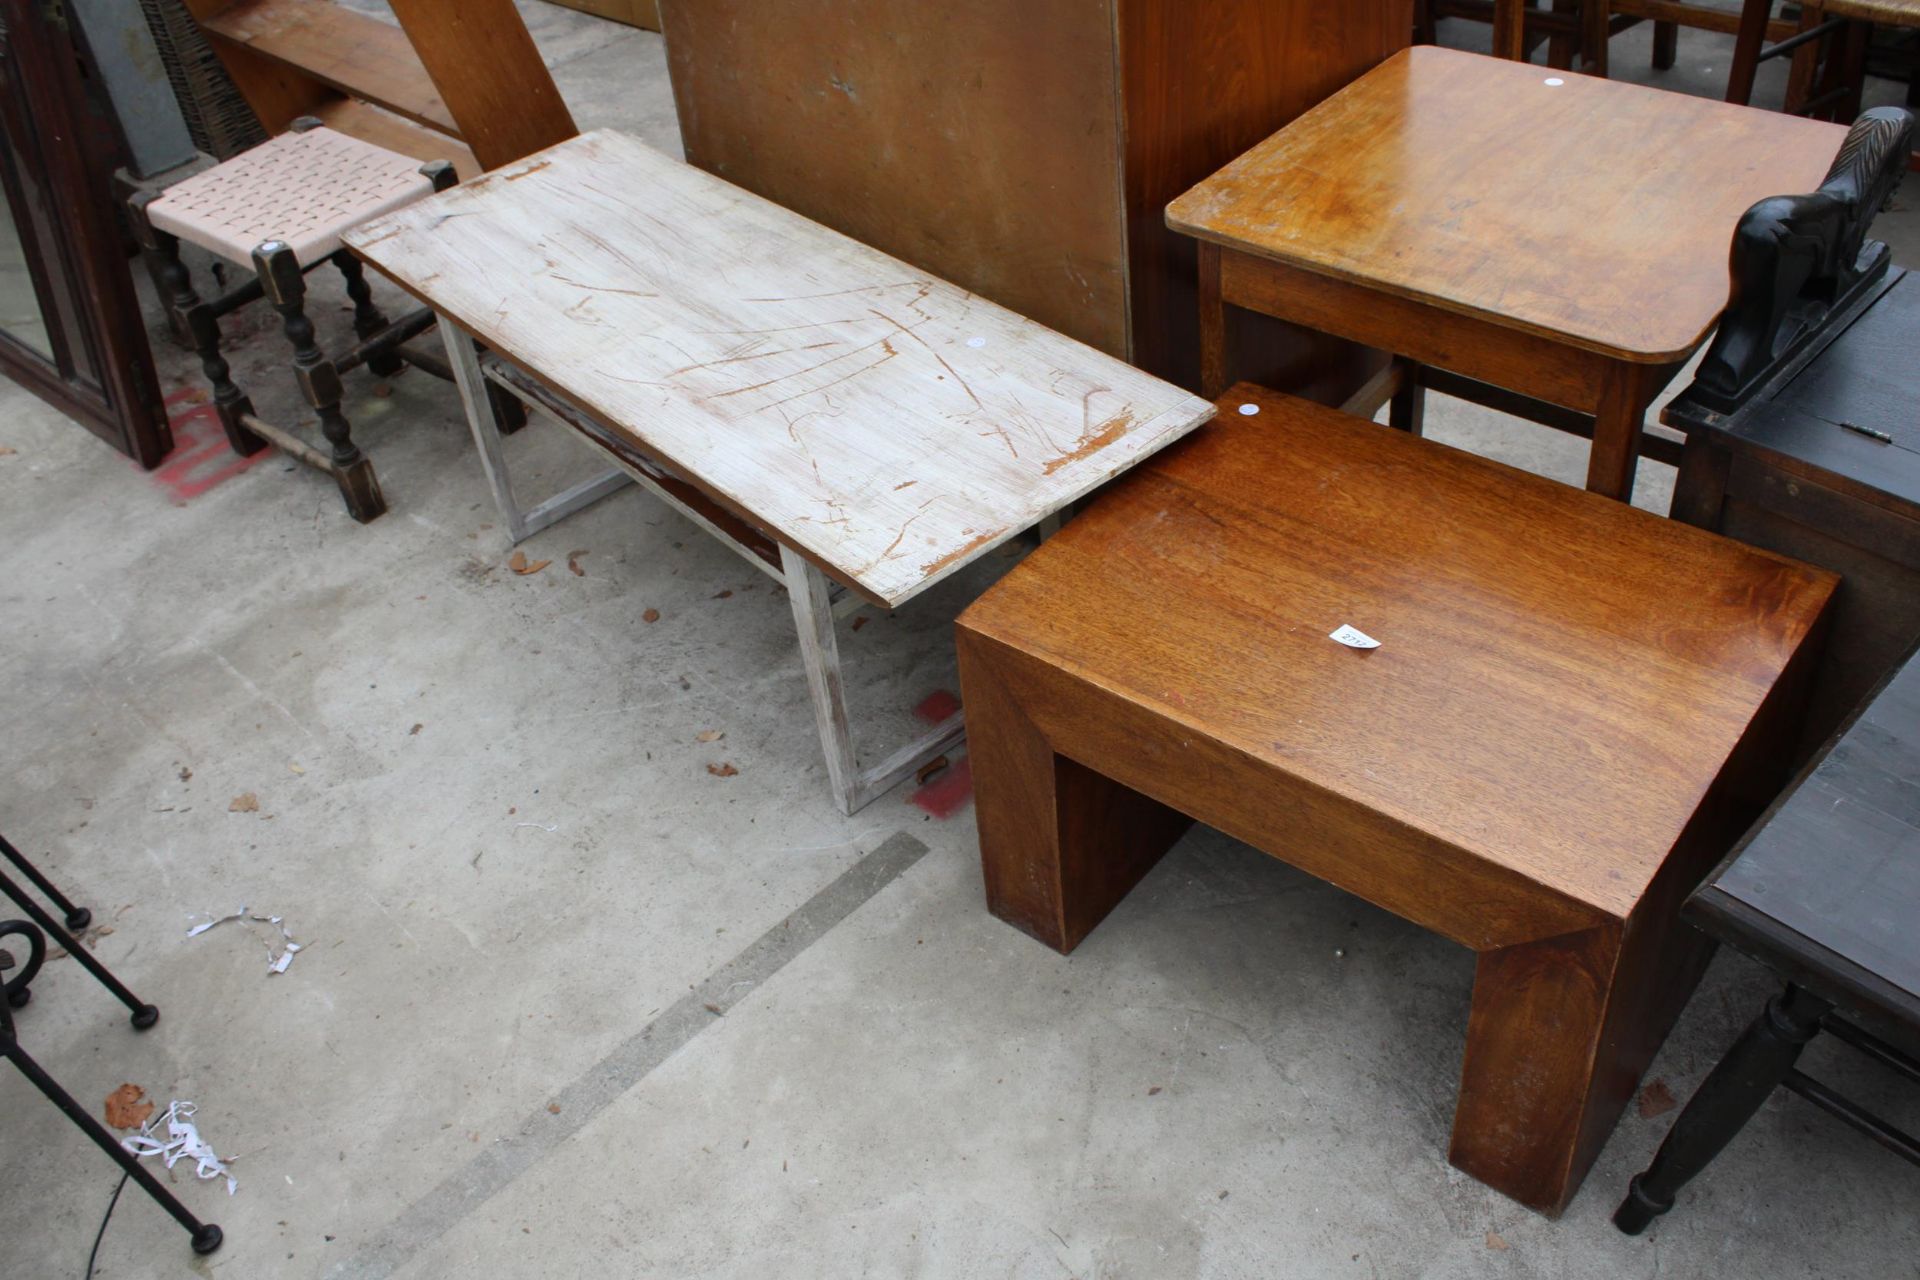 A HARDWOOD LAMP TABLE, RETRO TEAK COFFEE TABLE BY PLEASING FURNITURE (PYE FRANKLIN) AND A SMALL